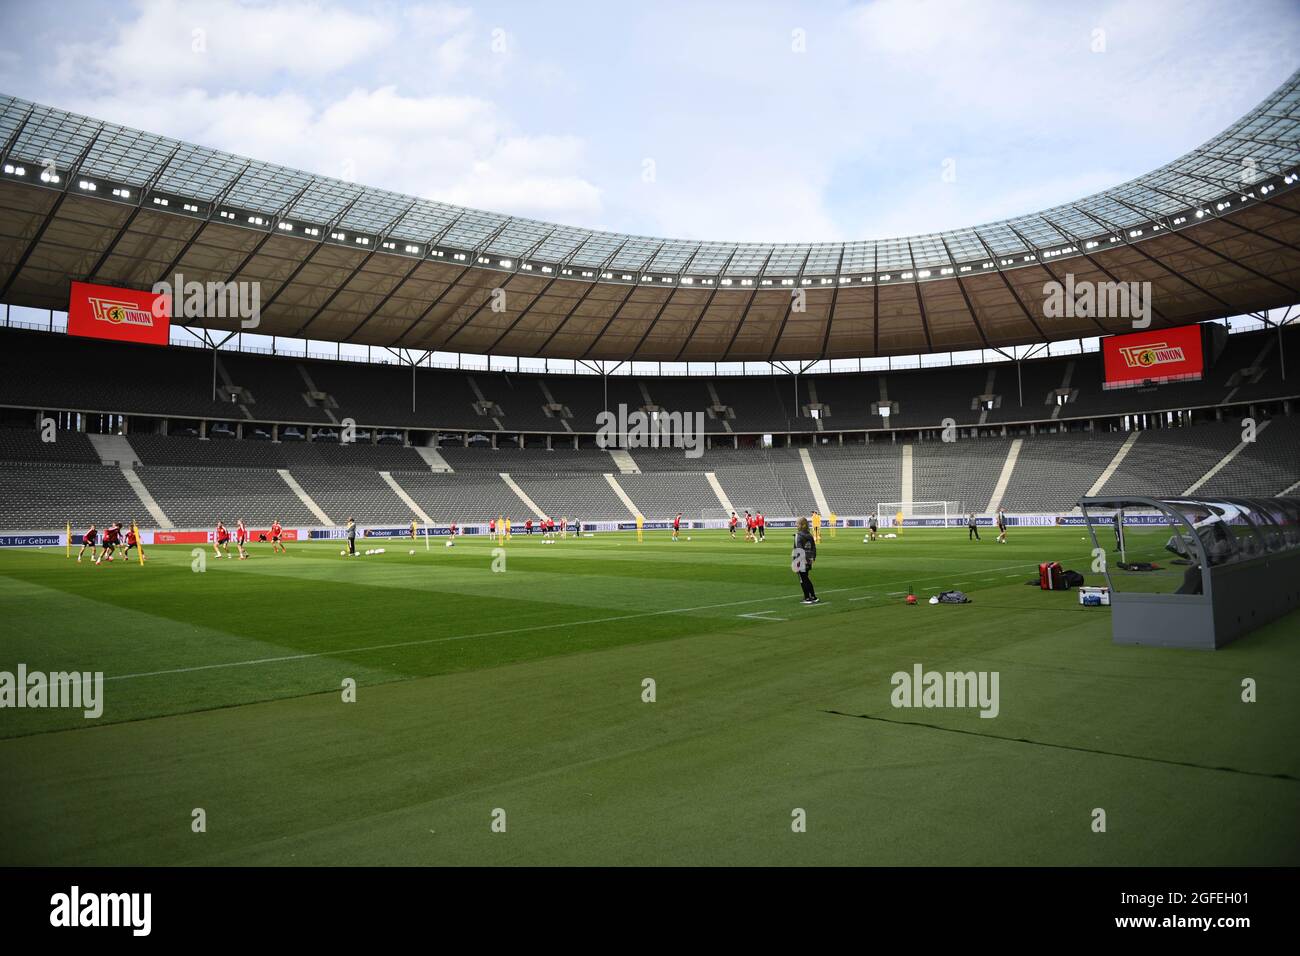 Berlin, Germany. 25th Aug, 2021. Football, Europa Conference League play-offs (second leg), 1. FC Union Berlin - Kuopio PS, final training Union Berlin at Olympiastadion. Union's club crest can be seen on the scoreboard while the players are training. Credit: Matthias Koch/dpa/Alamy Live News Stock Photo